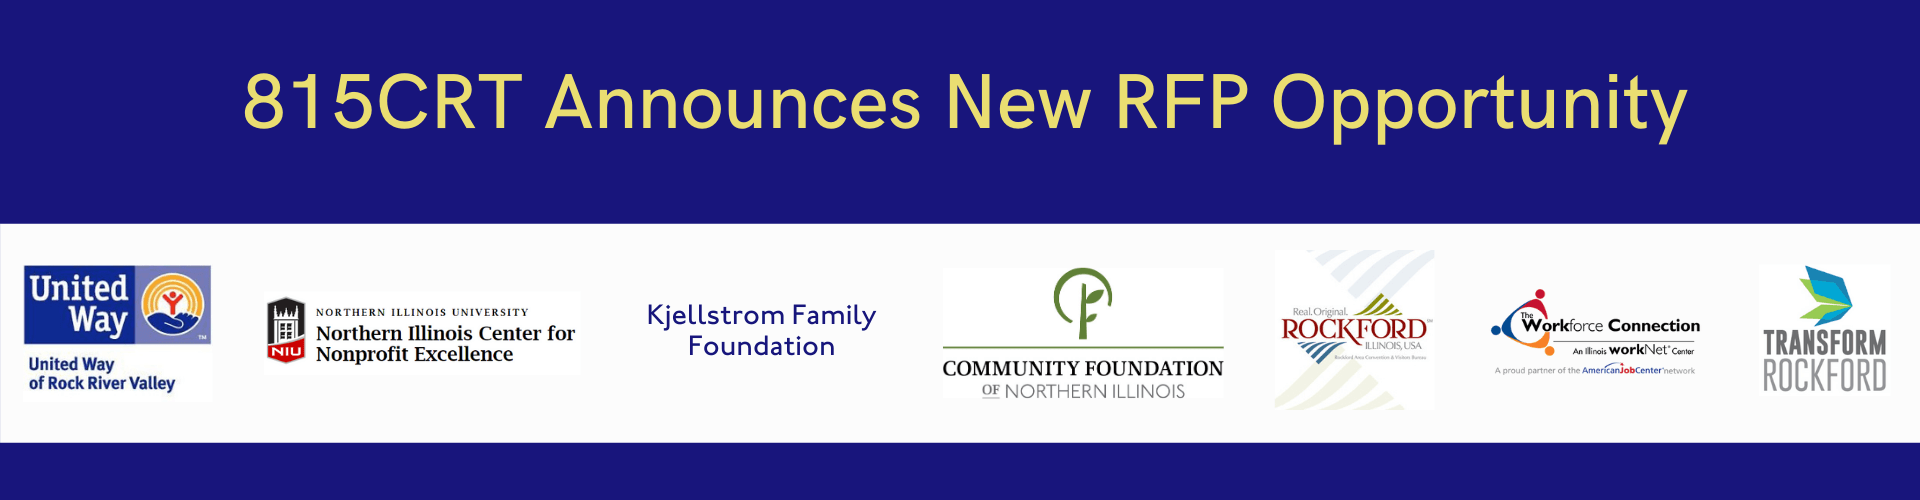 815CRT announces new RFP opportunity. Logos of United Way of Rock River Valley, Northern Illinois Center for Nonprofit Excellence, Kjellstrom Family Foundation, Community Foundation of NOrthern ILlinois, Rockford Area Convention and Visitors Bureau, The Workforce Connection, Transform Rockford